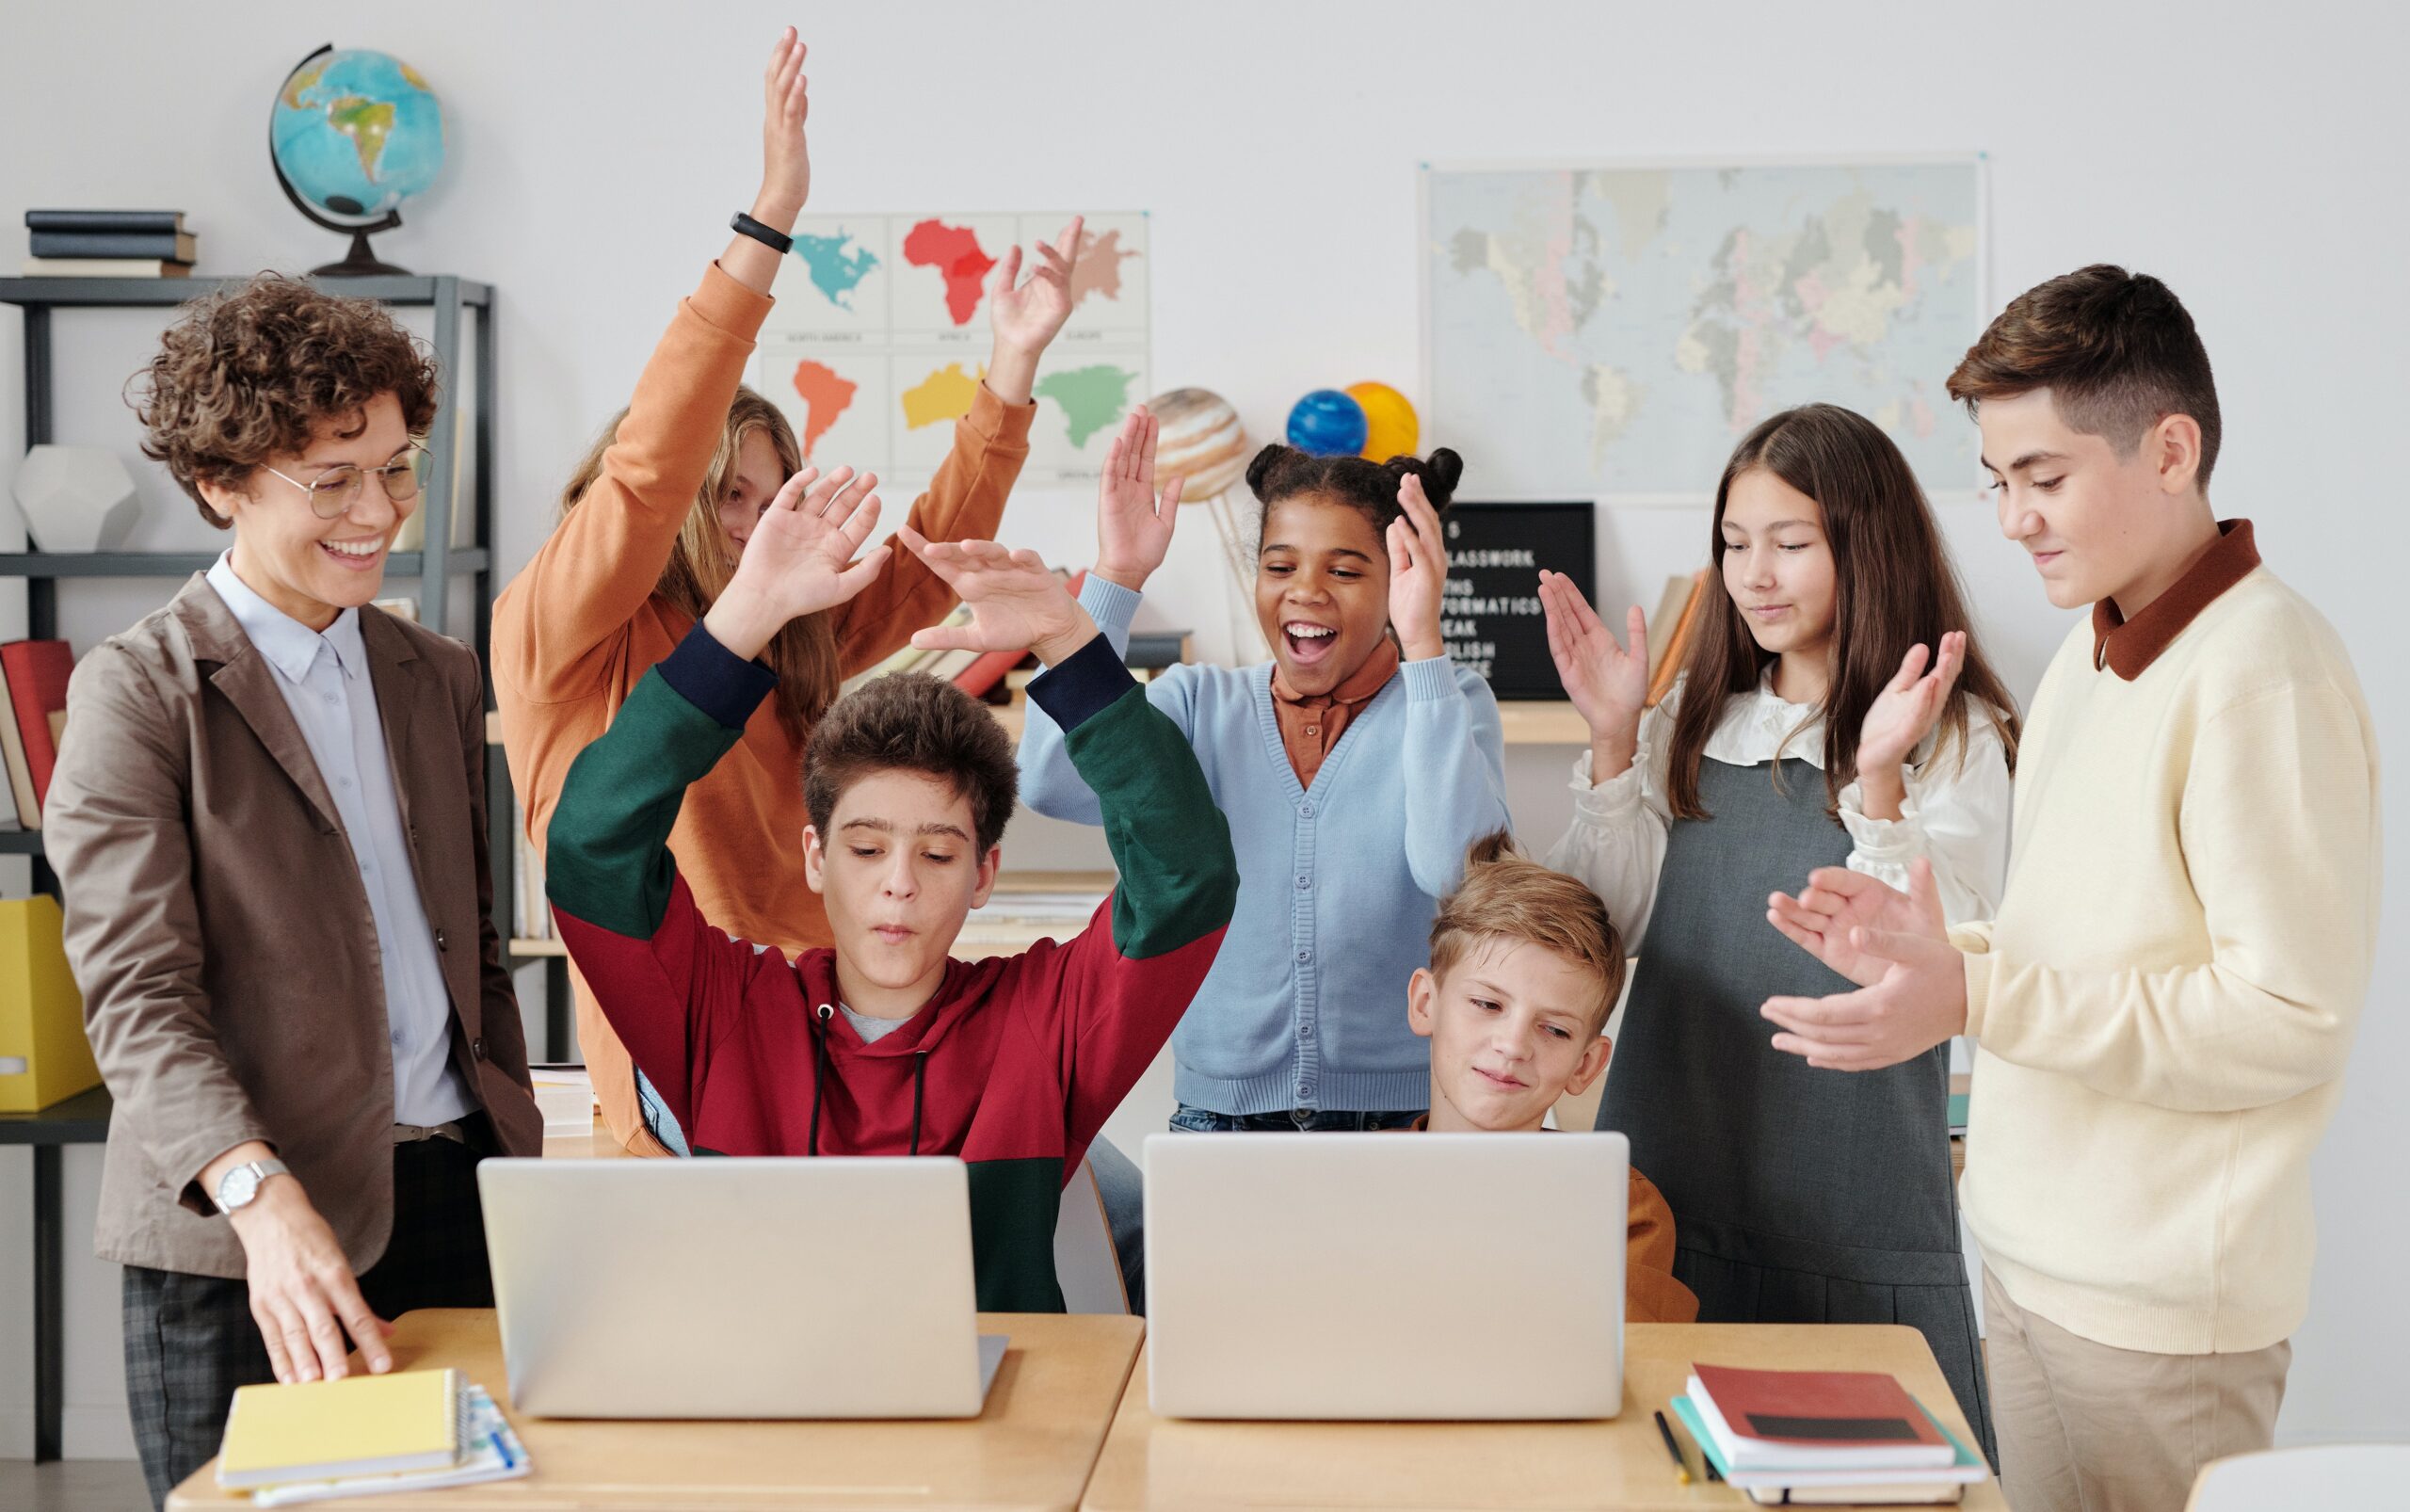 teens gathered around a computer looking excited with their hands in the air